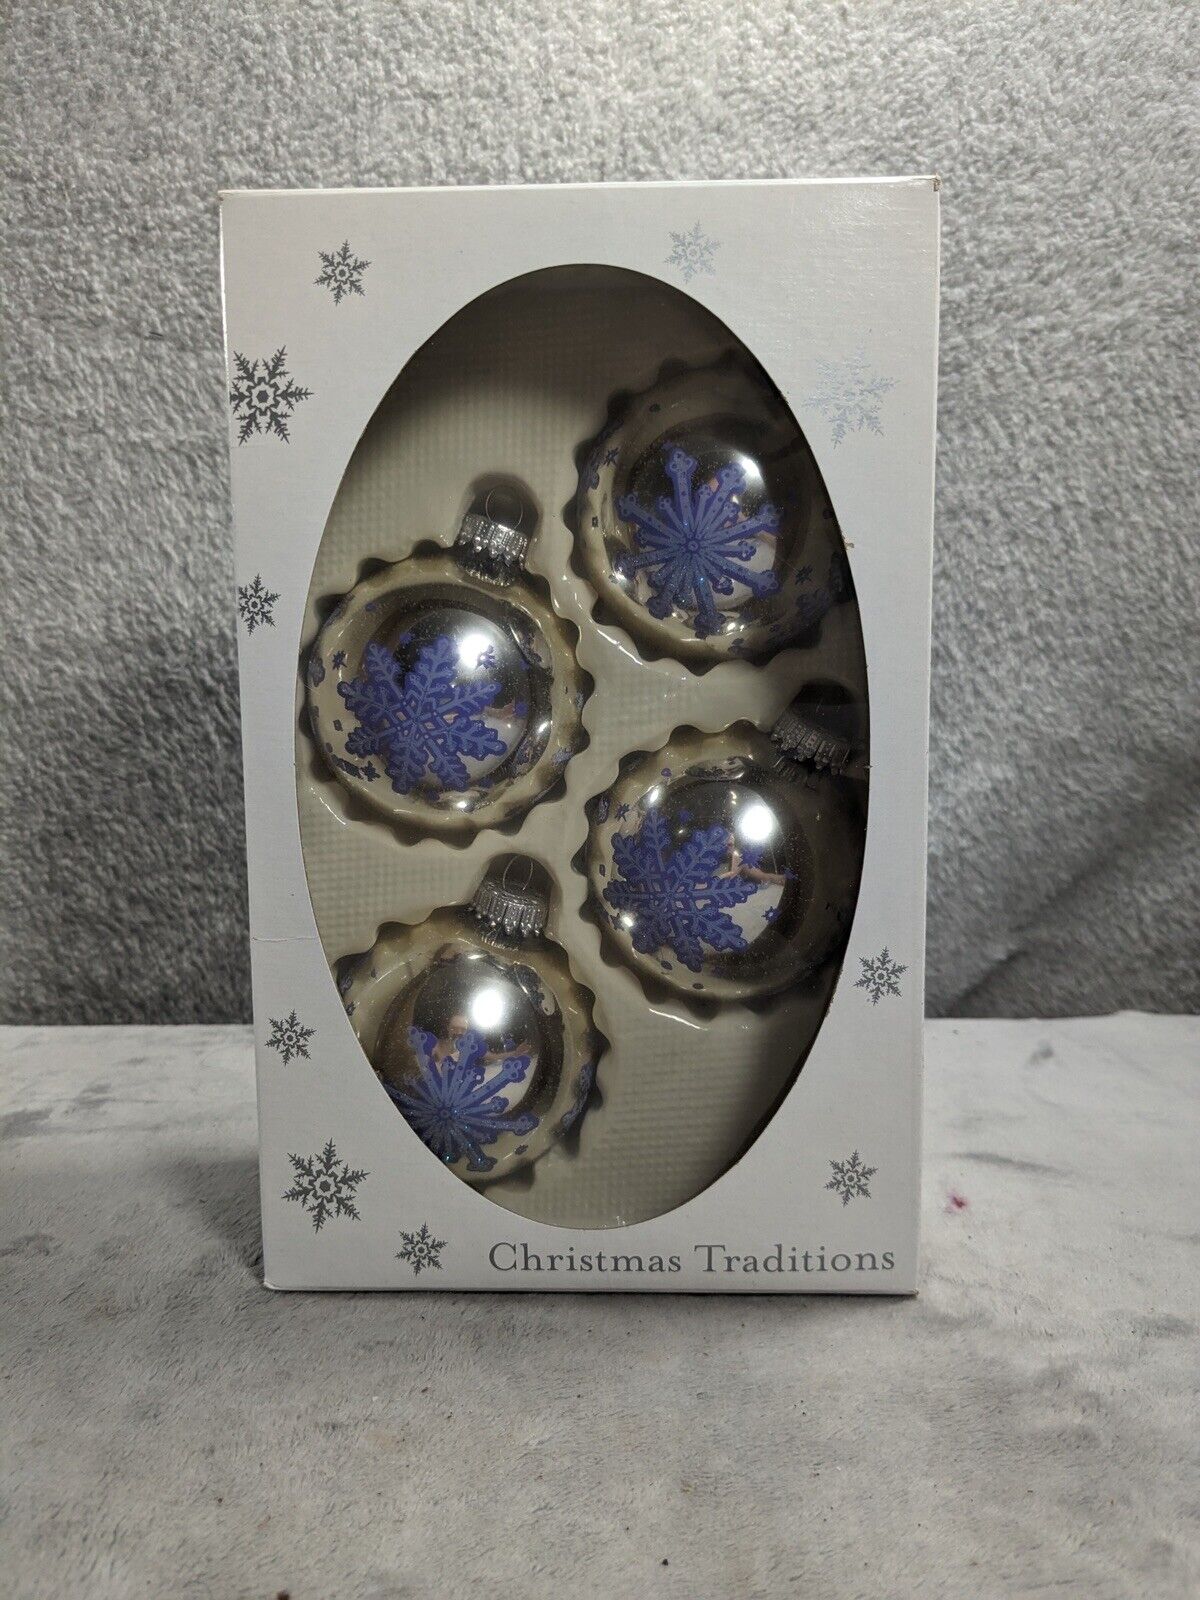 4 Vintage Glass Christmas Ornaments Silver With Blue Snowflakes